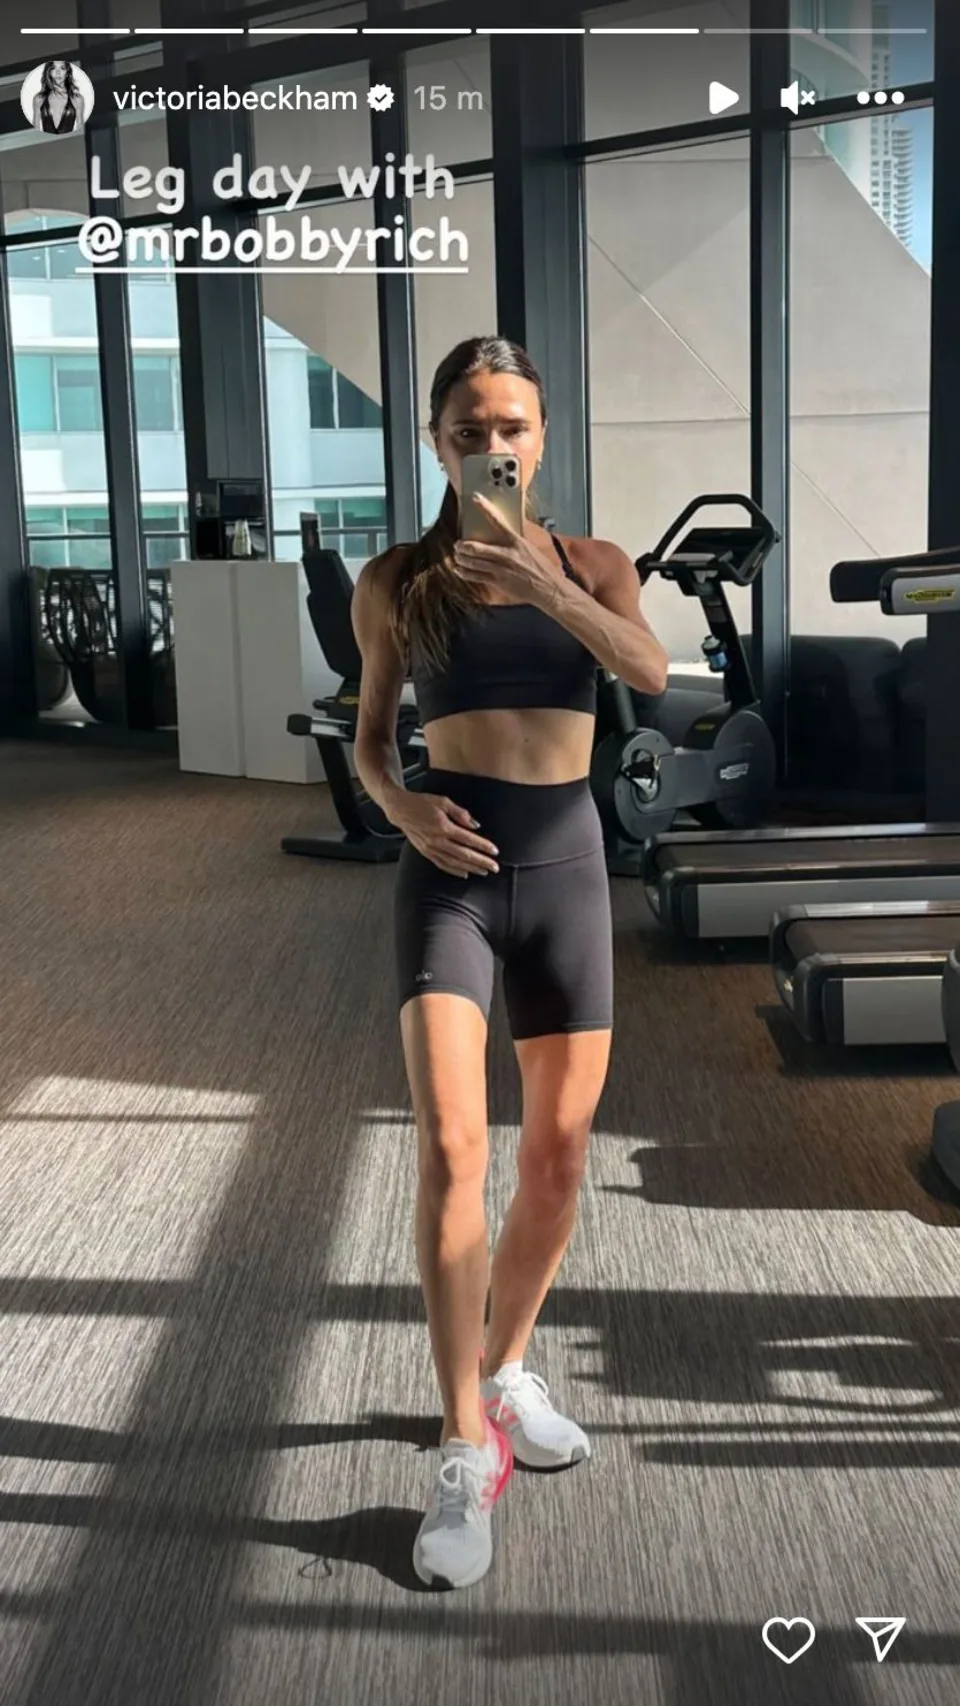 Victoria Beckham reveals her beauty and fitness routine she follows to look  that good at 49